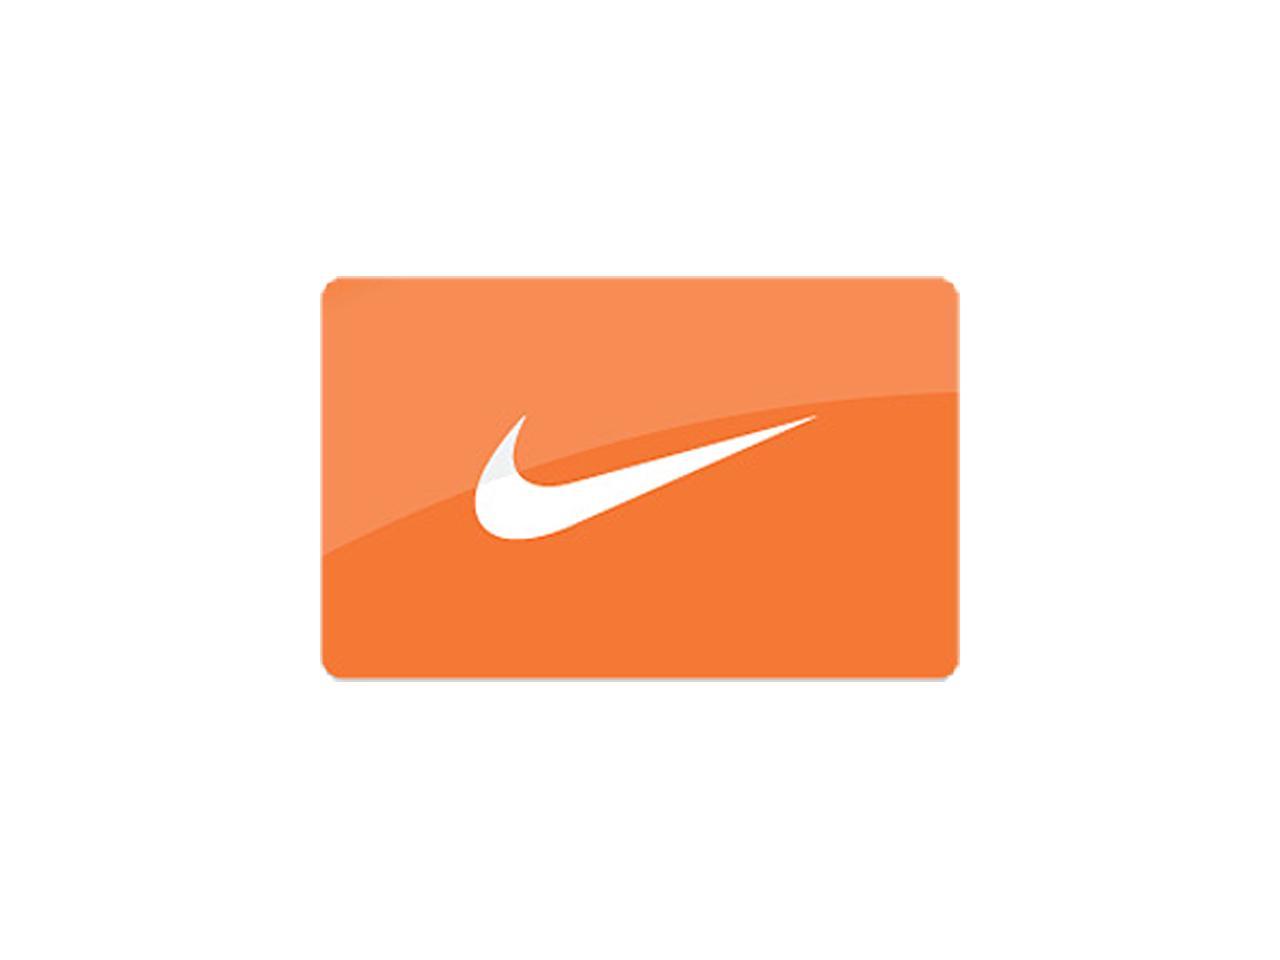 Nike $100 Gift Card (Email Delivery) - Newegg.com